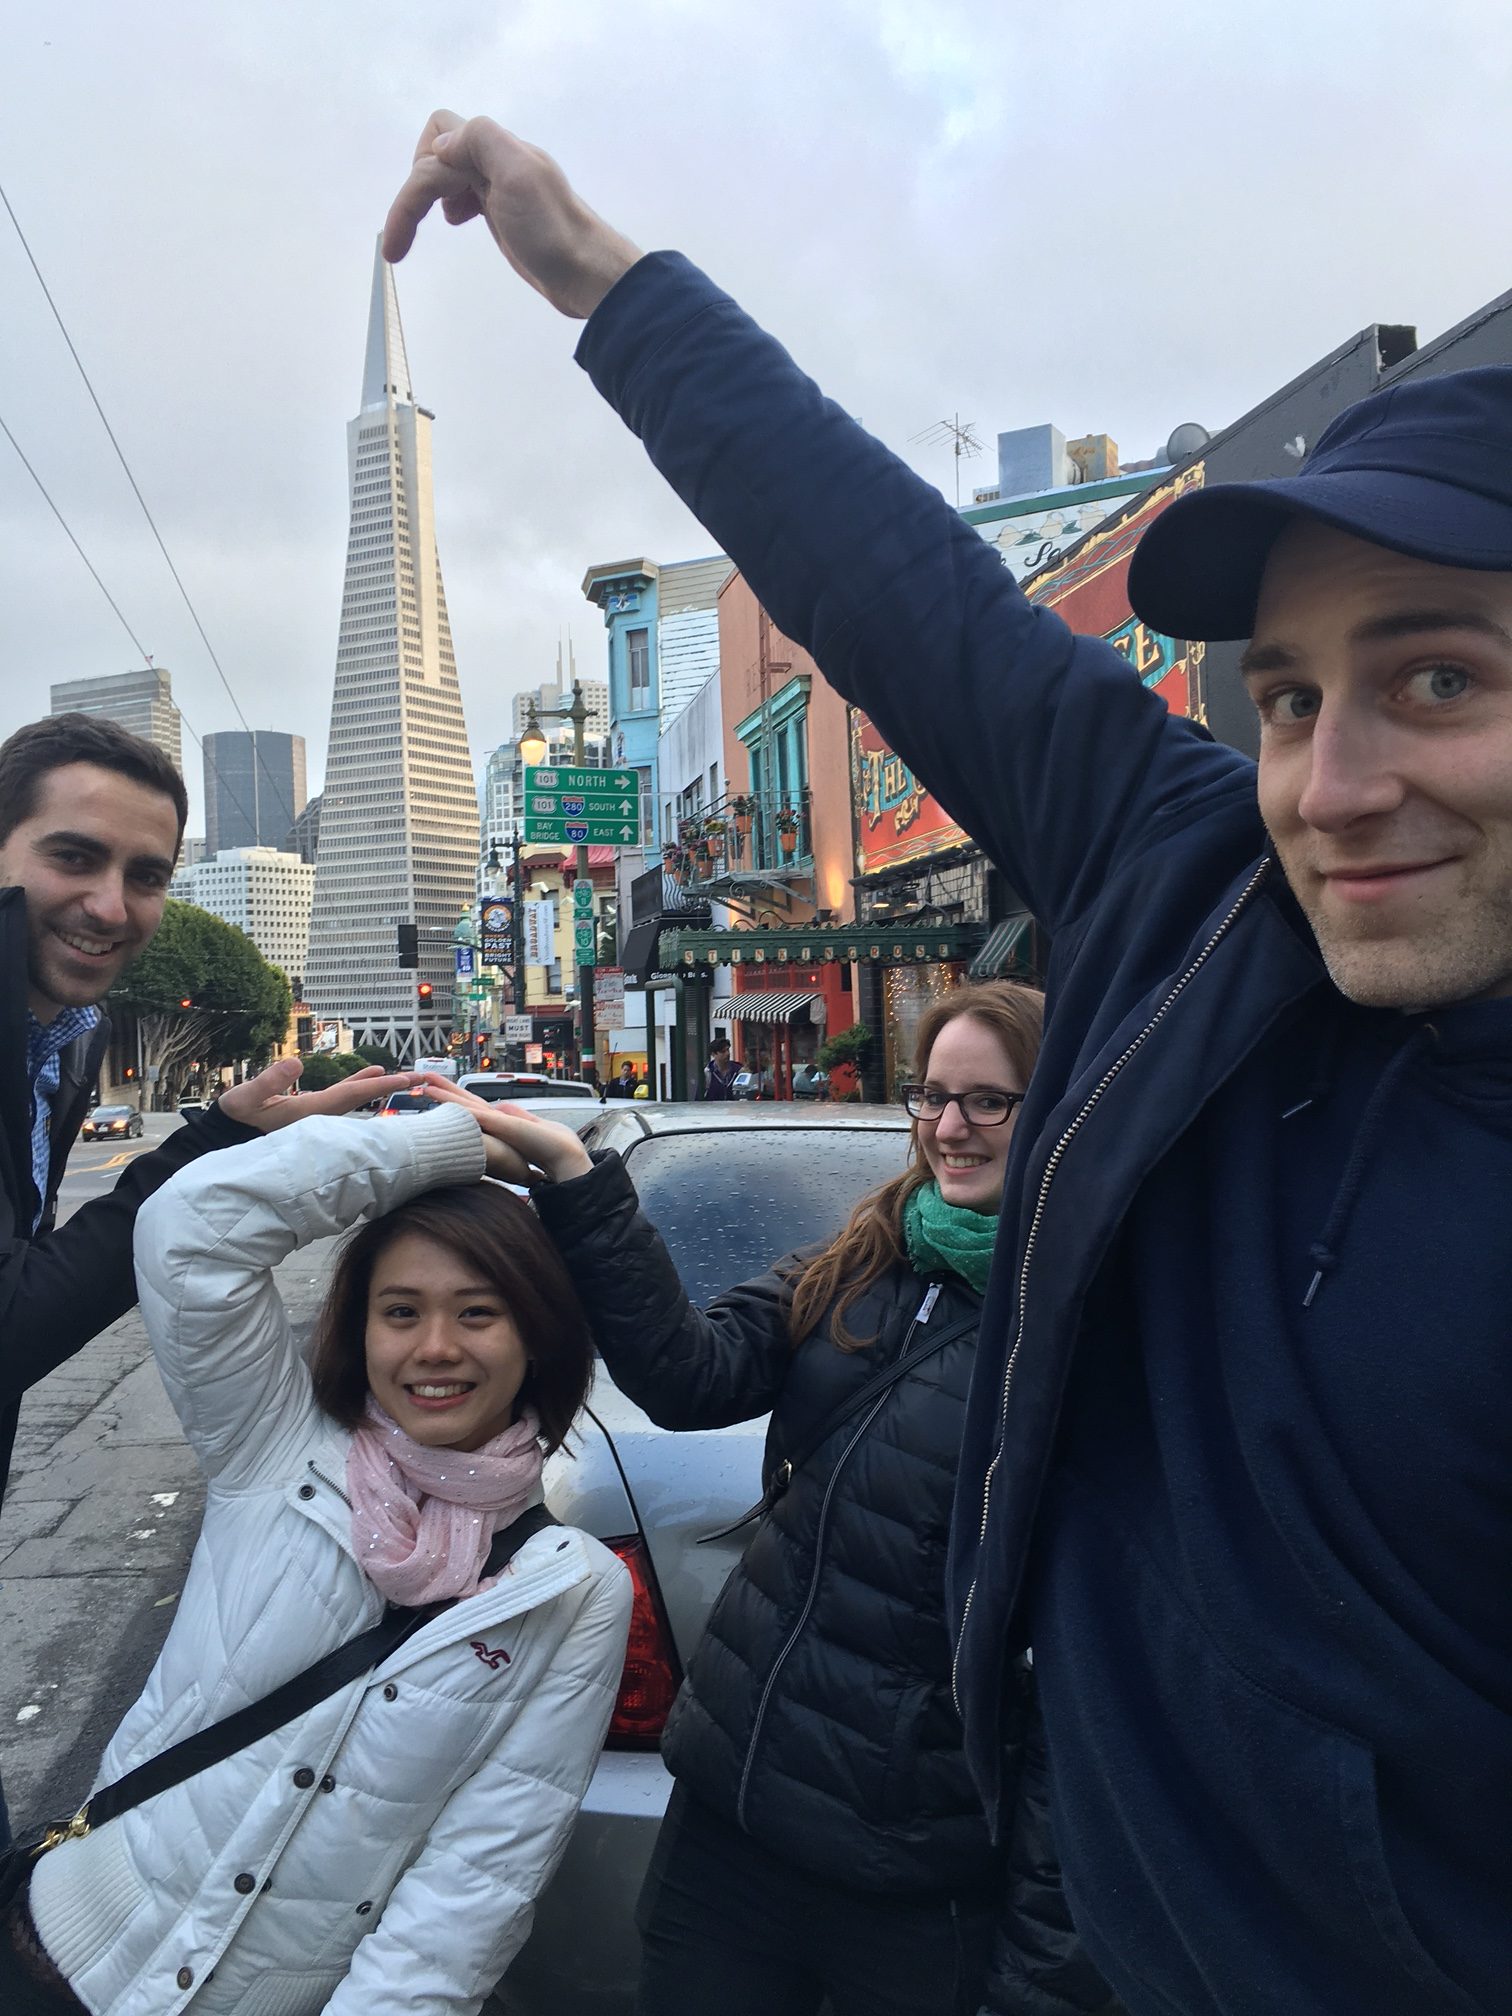 The SF Hunt: A Dope City-Wide Scavenger Hunt | SF | Funcheap